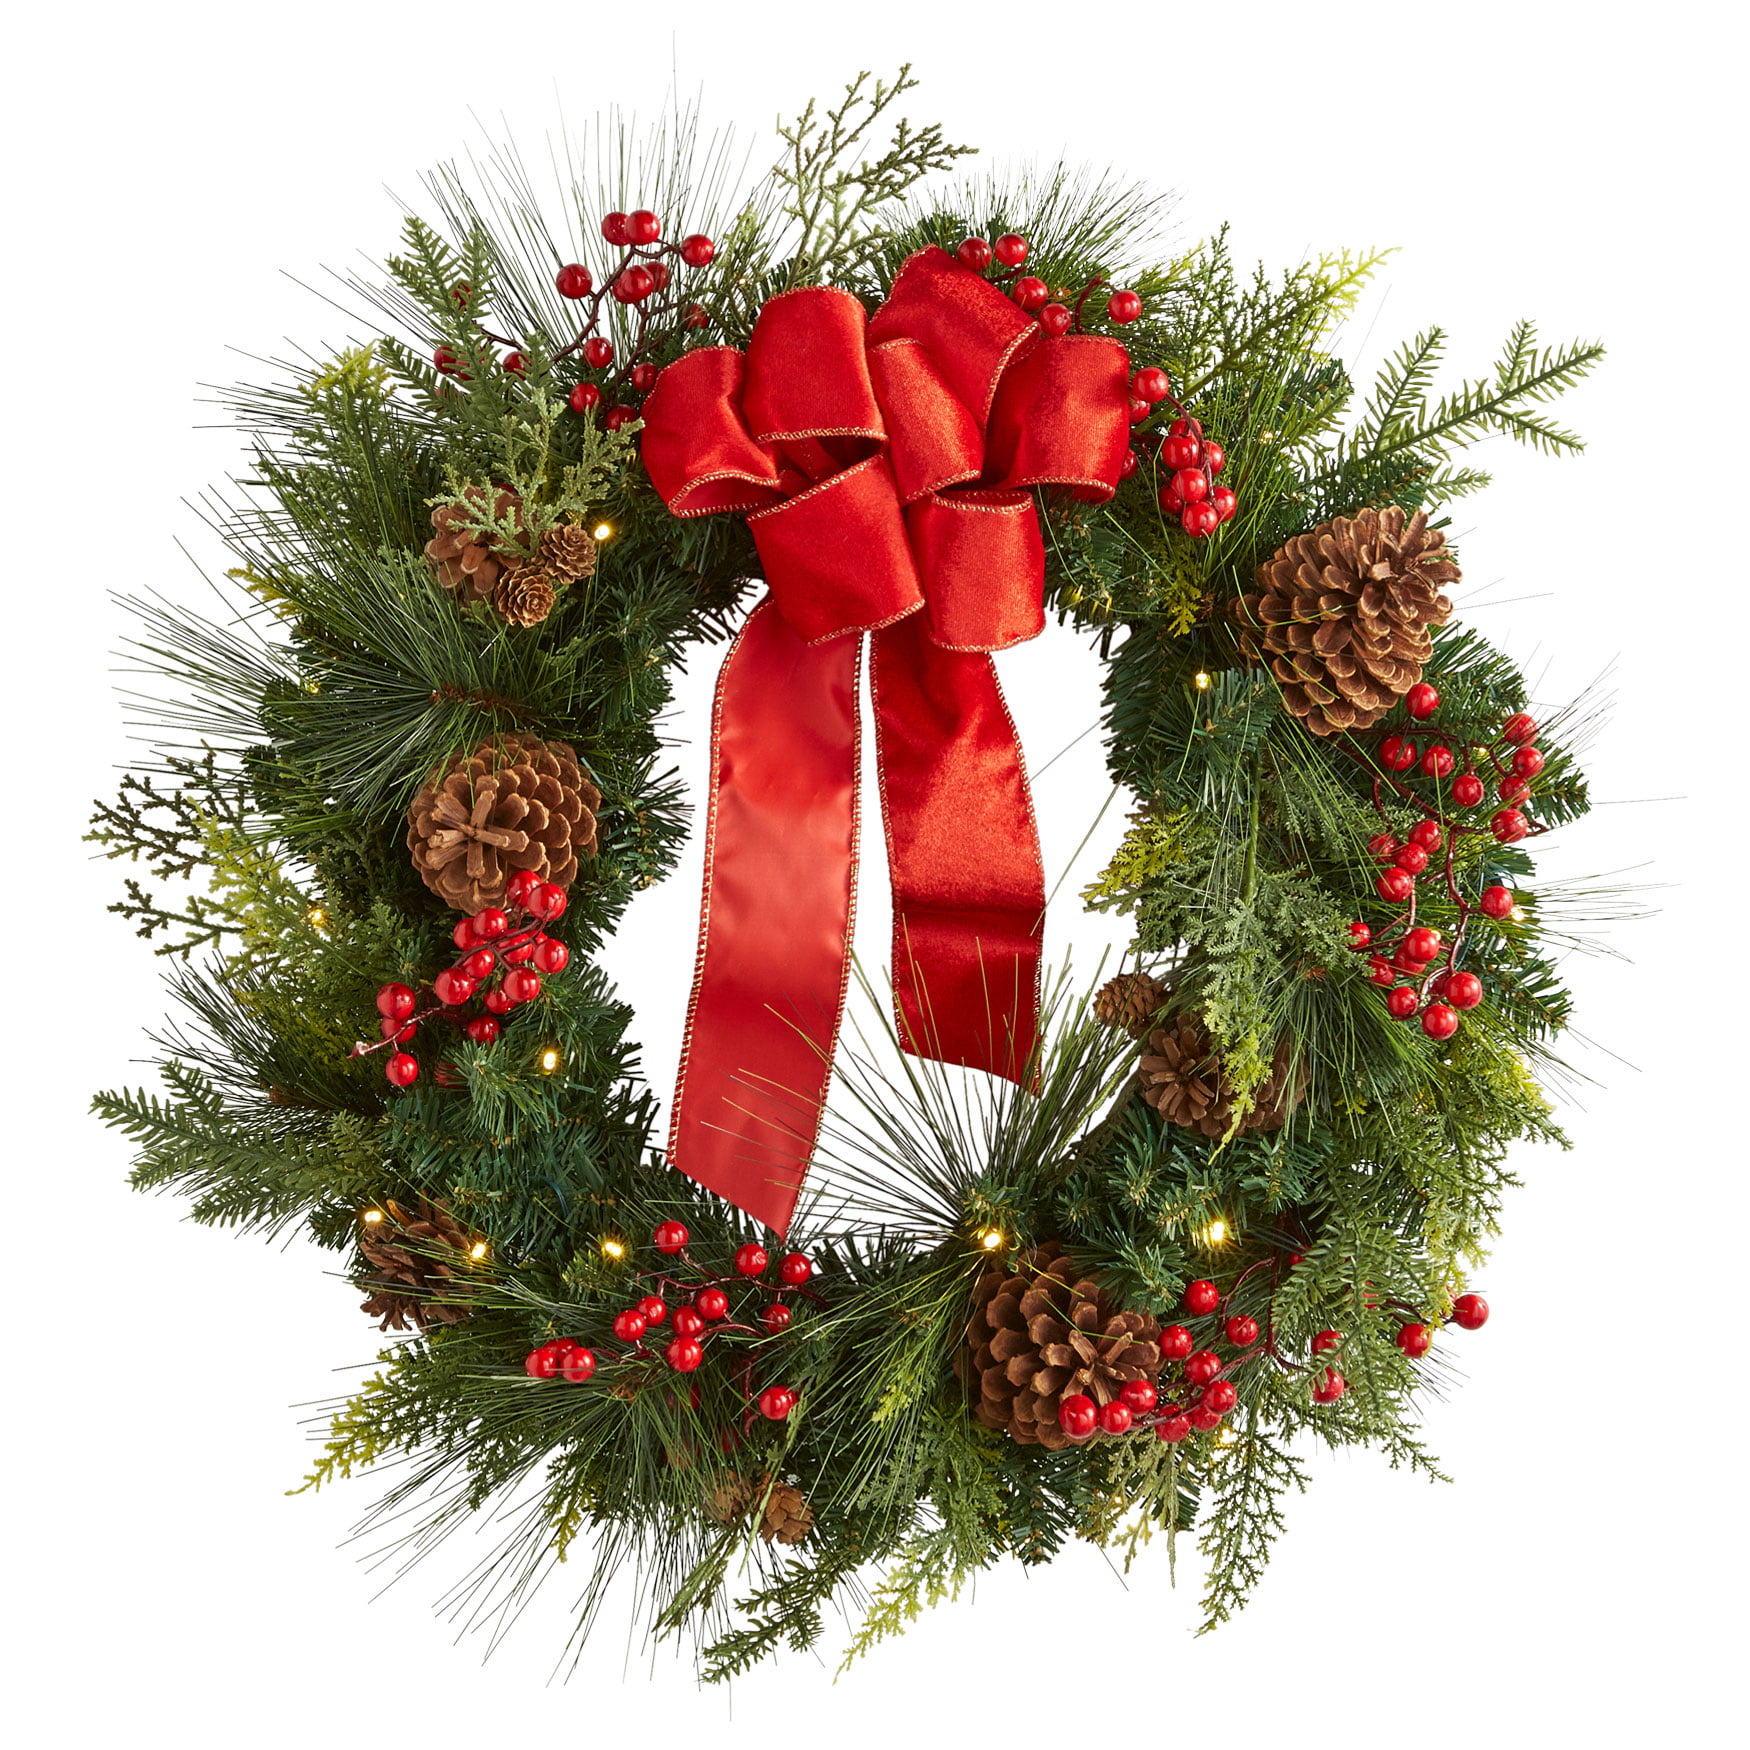 Lighted Christmas Wreath - Photos All Recommendation